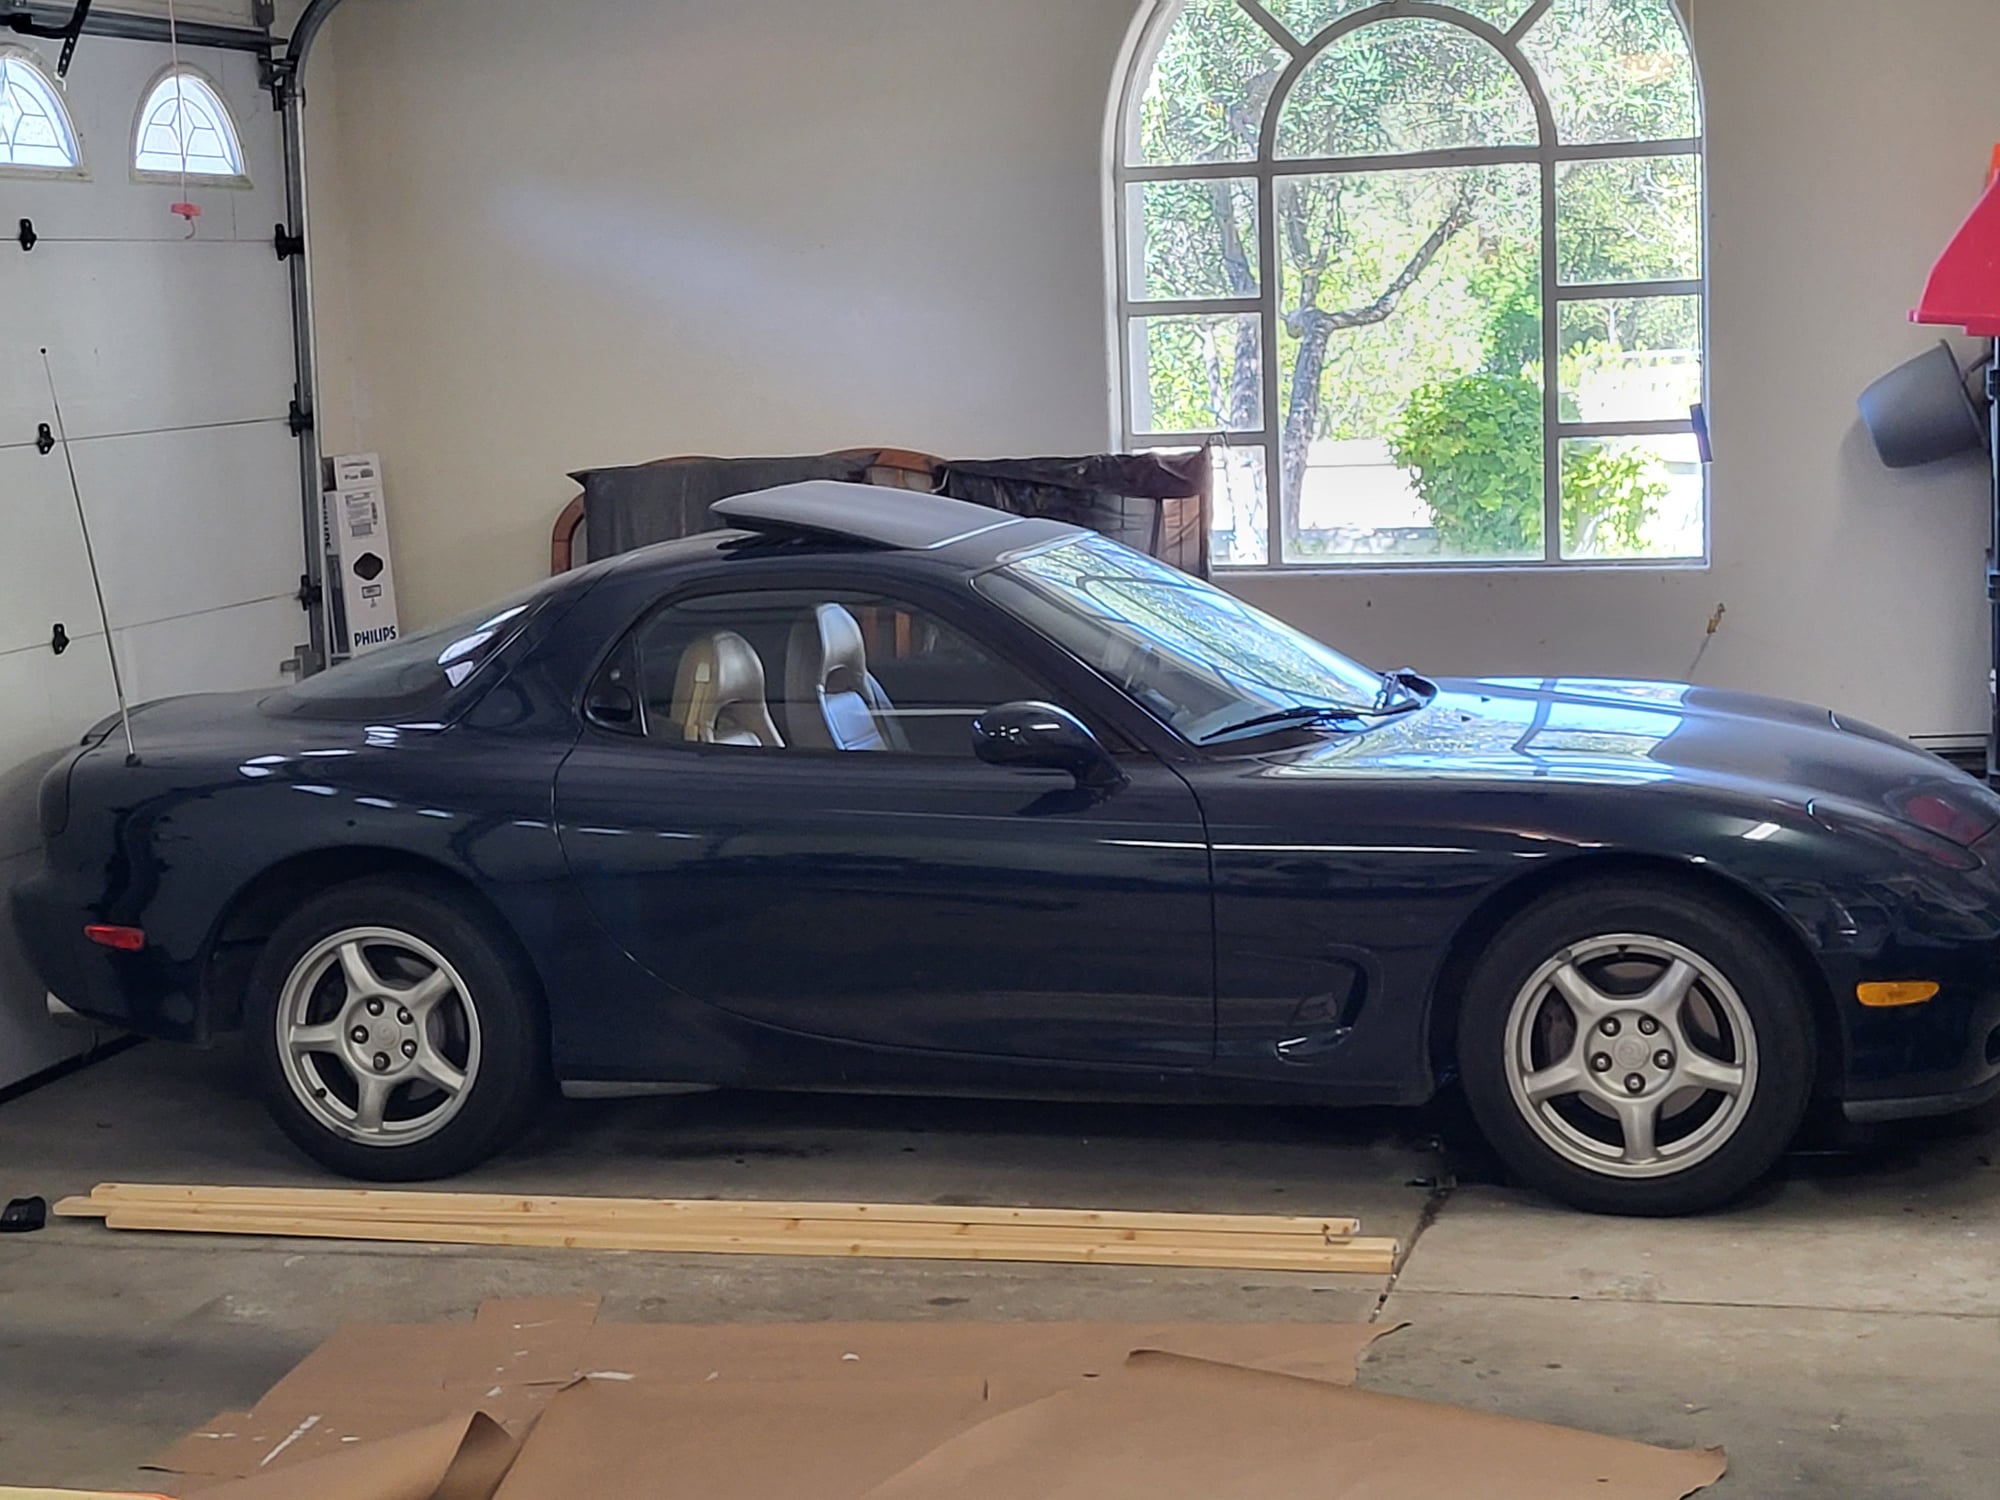 1995 Mazda RX-7 - Selling one of the last 1995 RX-7s shipped from Japan - Used - VIN JM1FD3336S0400394 - 155,000 Miles - Other - 2WD - Manual - Coupe - Blue - Danville, CA 94526, United States